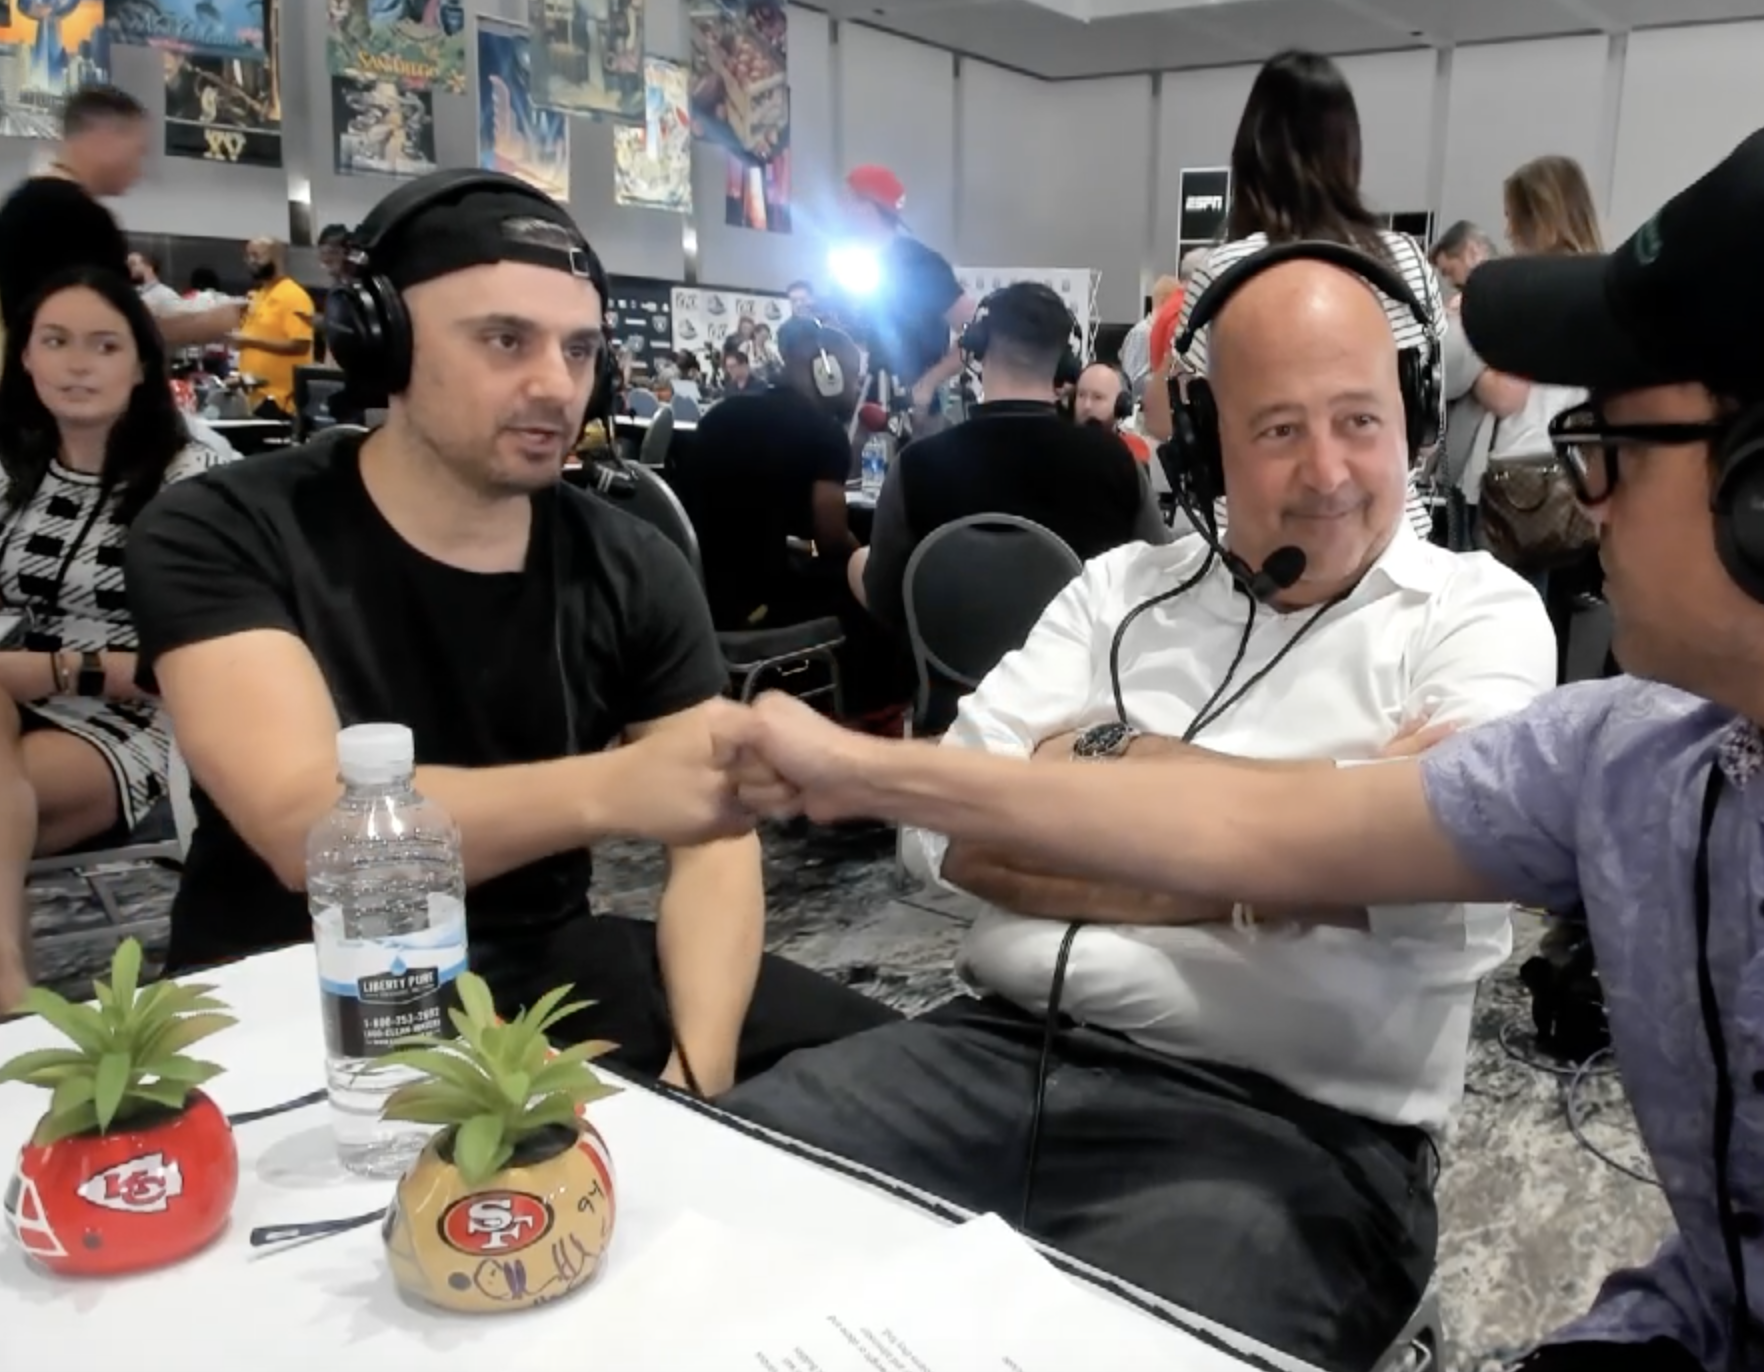 Andrew Zimmern and Gary Vaynerchuk collide on Baltimore Positive at Miami Super Bowl